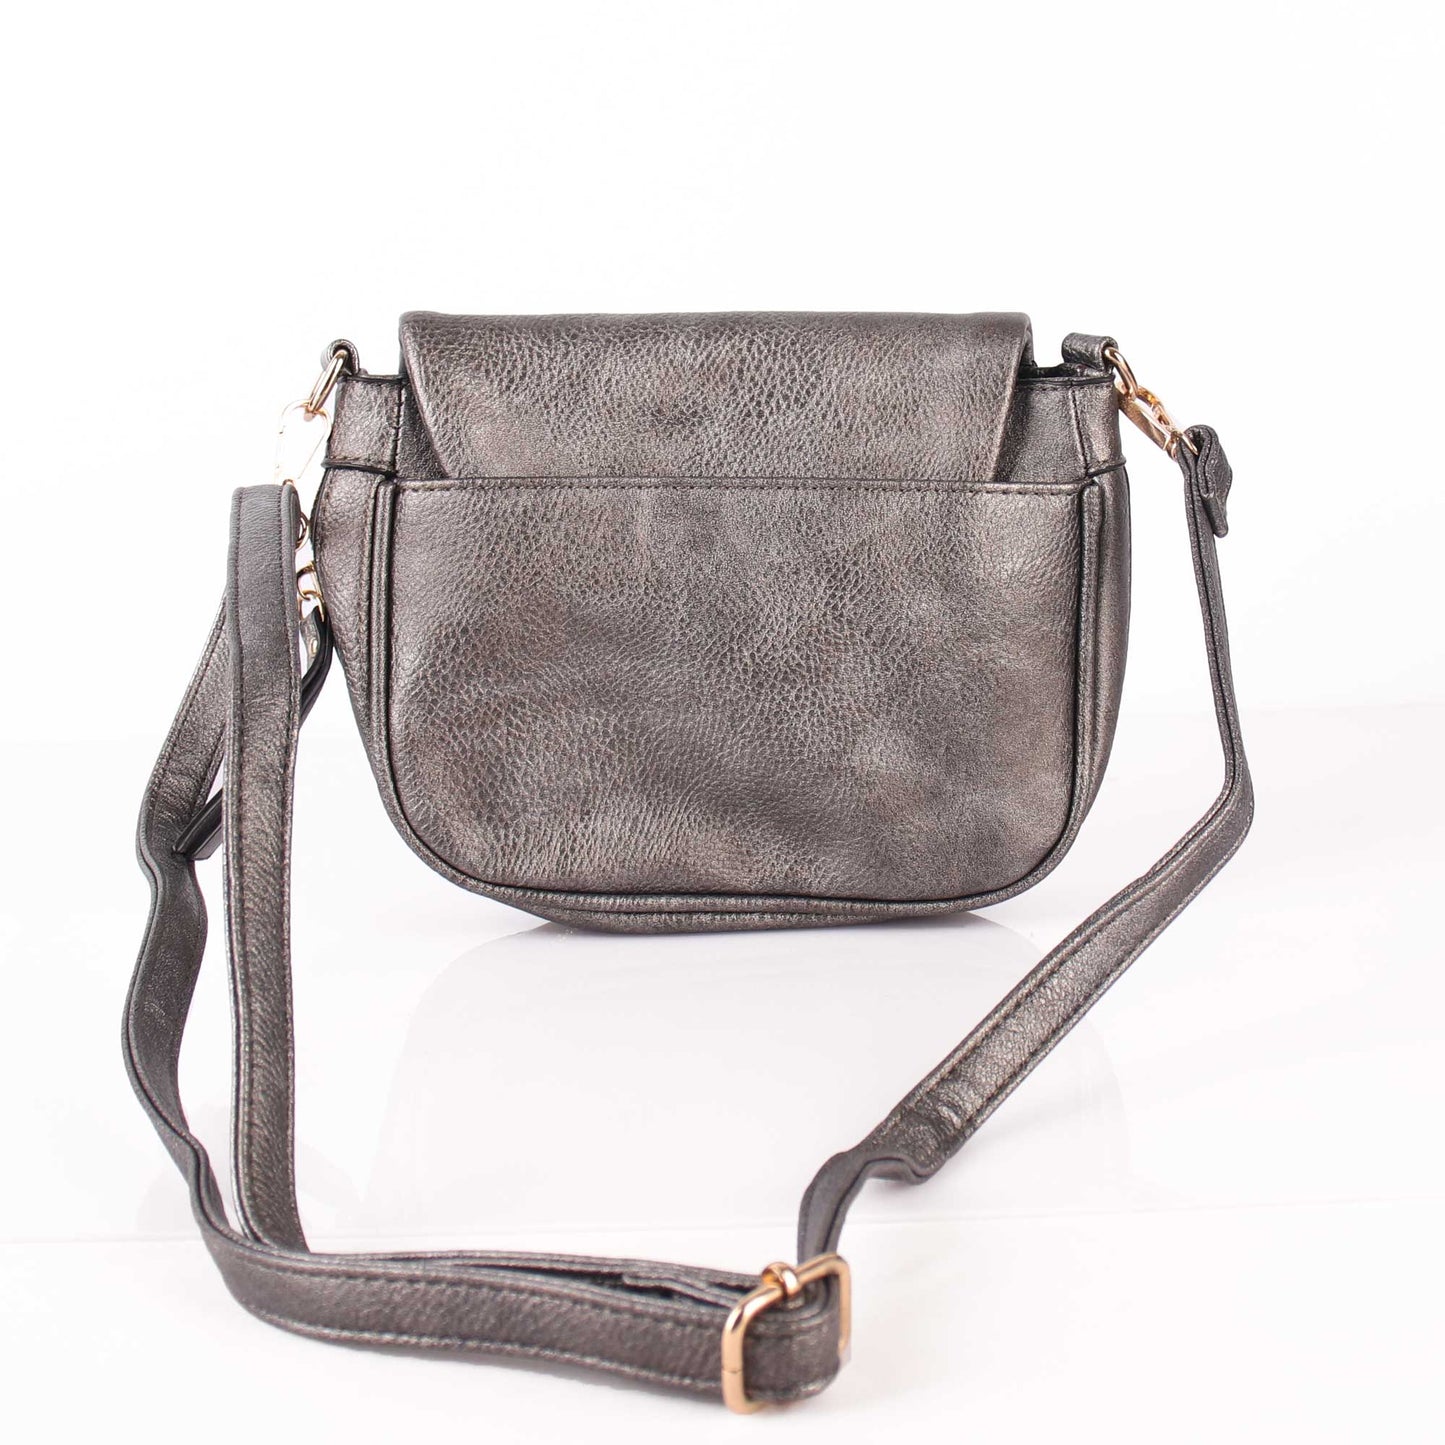 The Classic conventional Stylish Grey Sling Bag